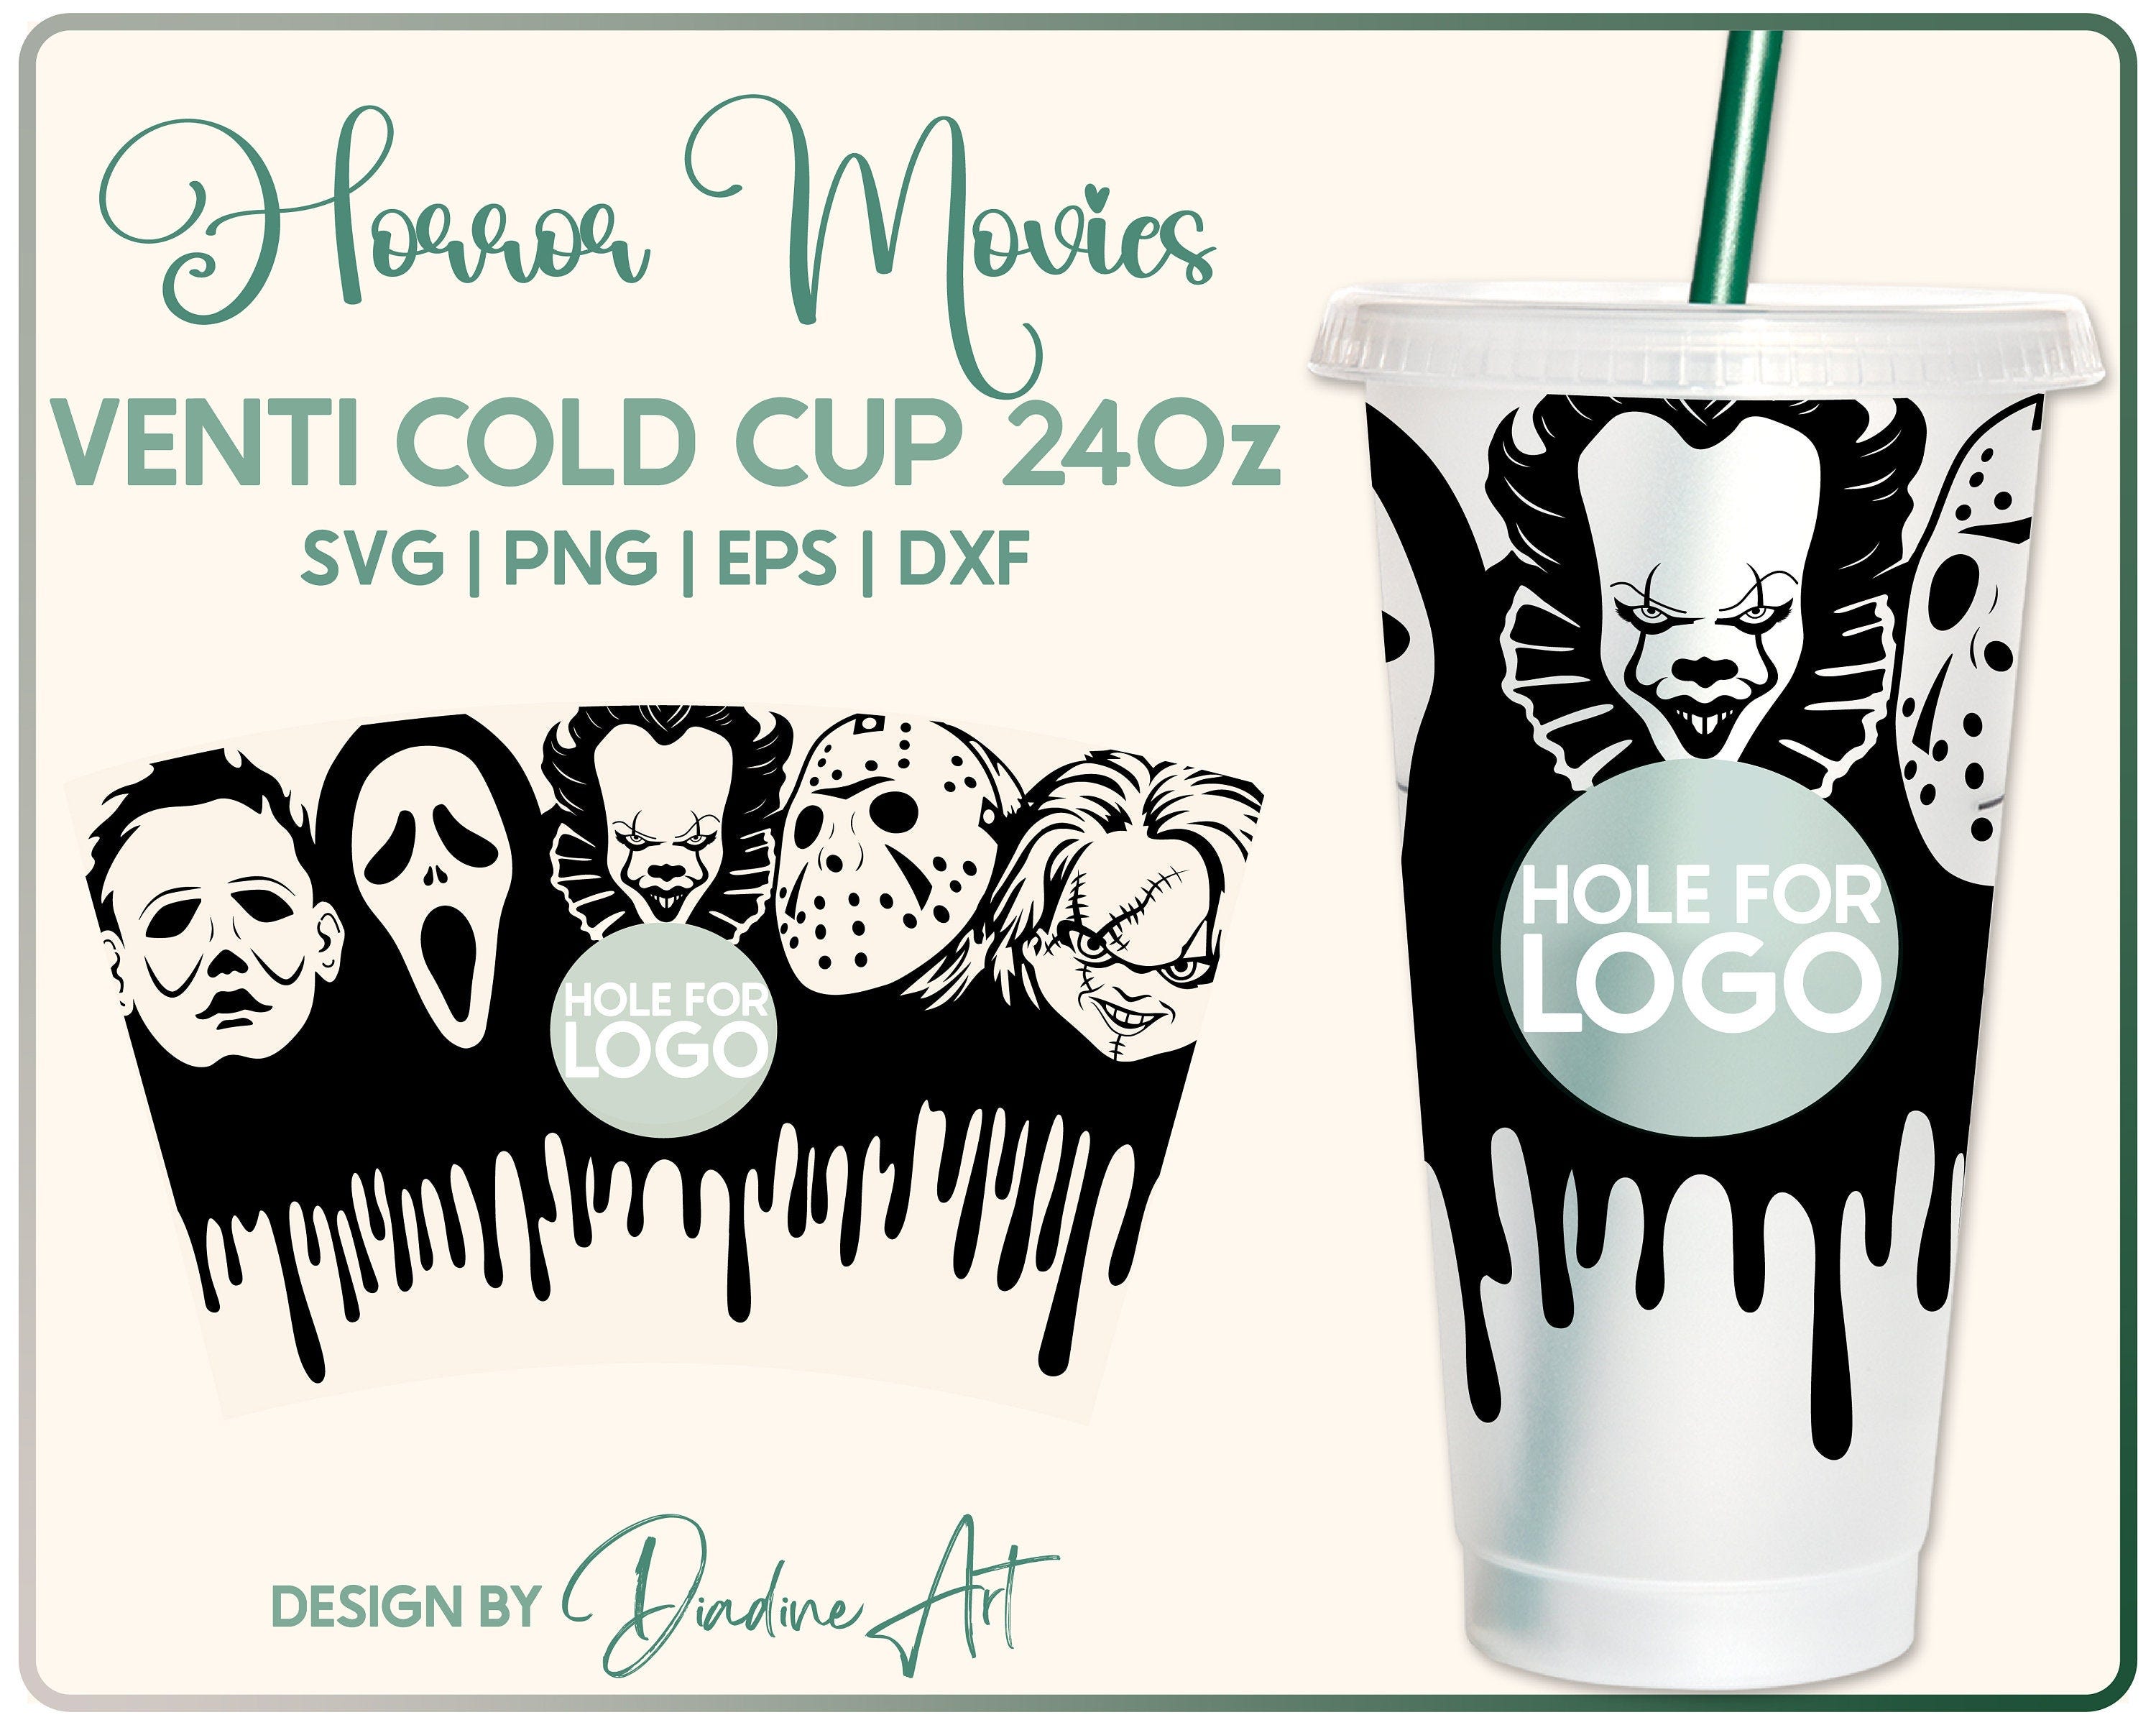 Horror Movie Seamless Full Wrap svg, Halloween Horror DIY Full Wrap For Venti Cold Cup 24oz svg, png, Vinyl Cut File, Cricut, Silhouette